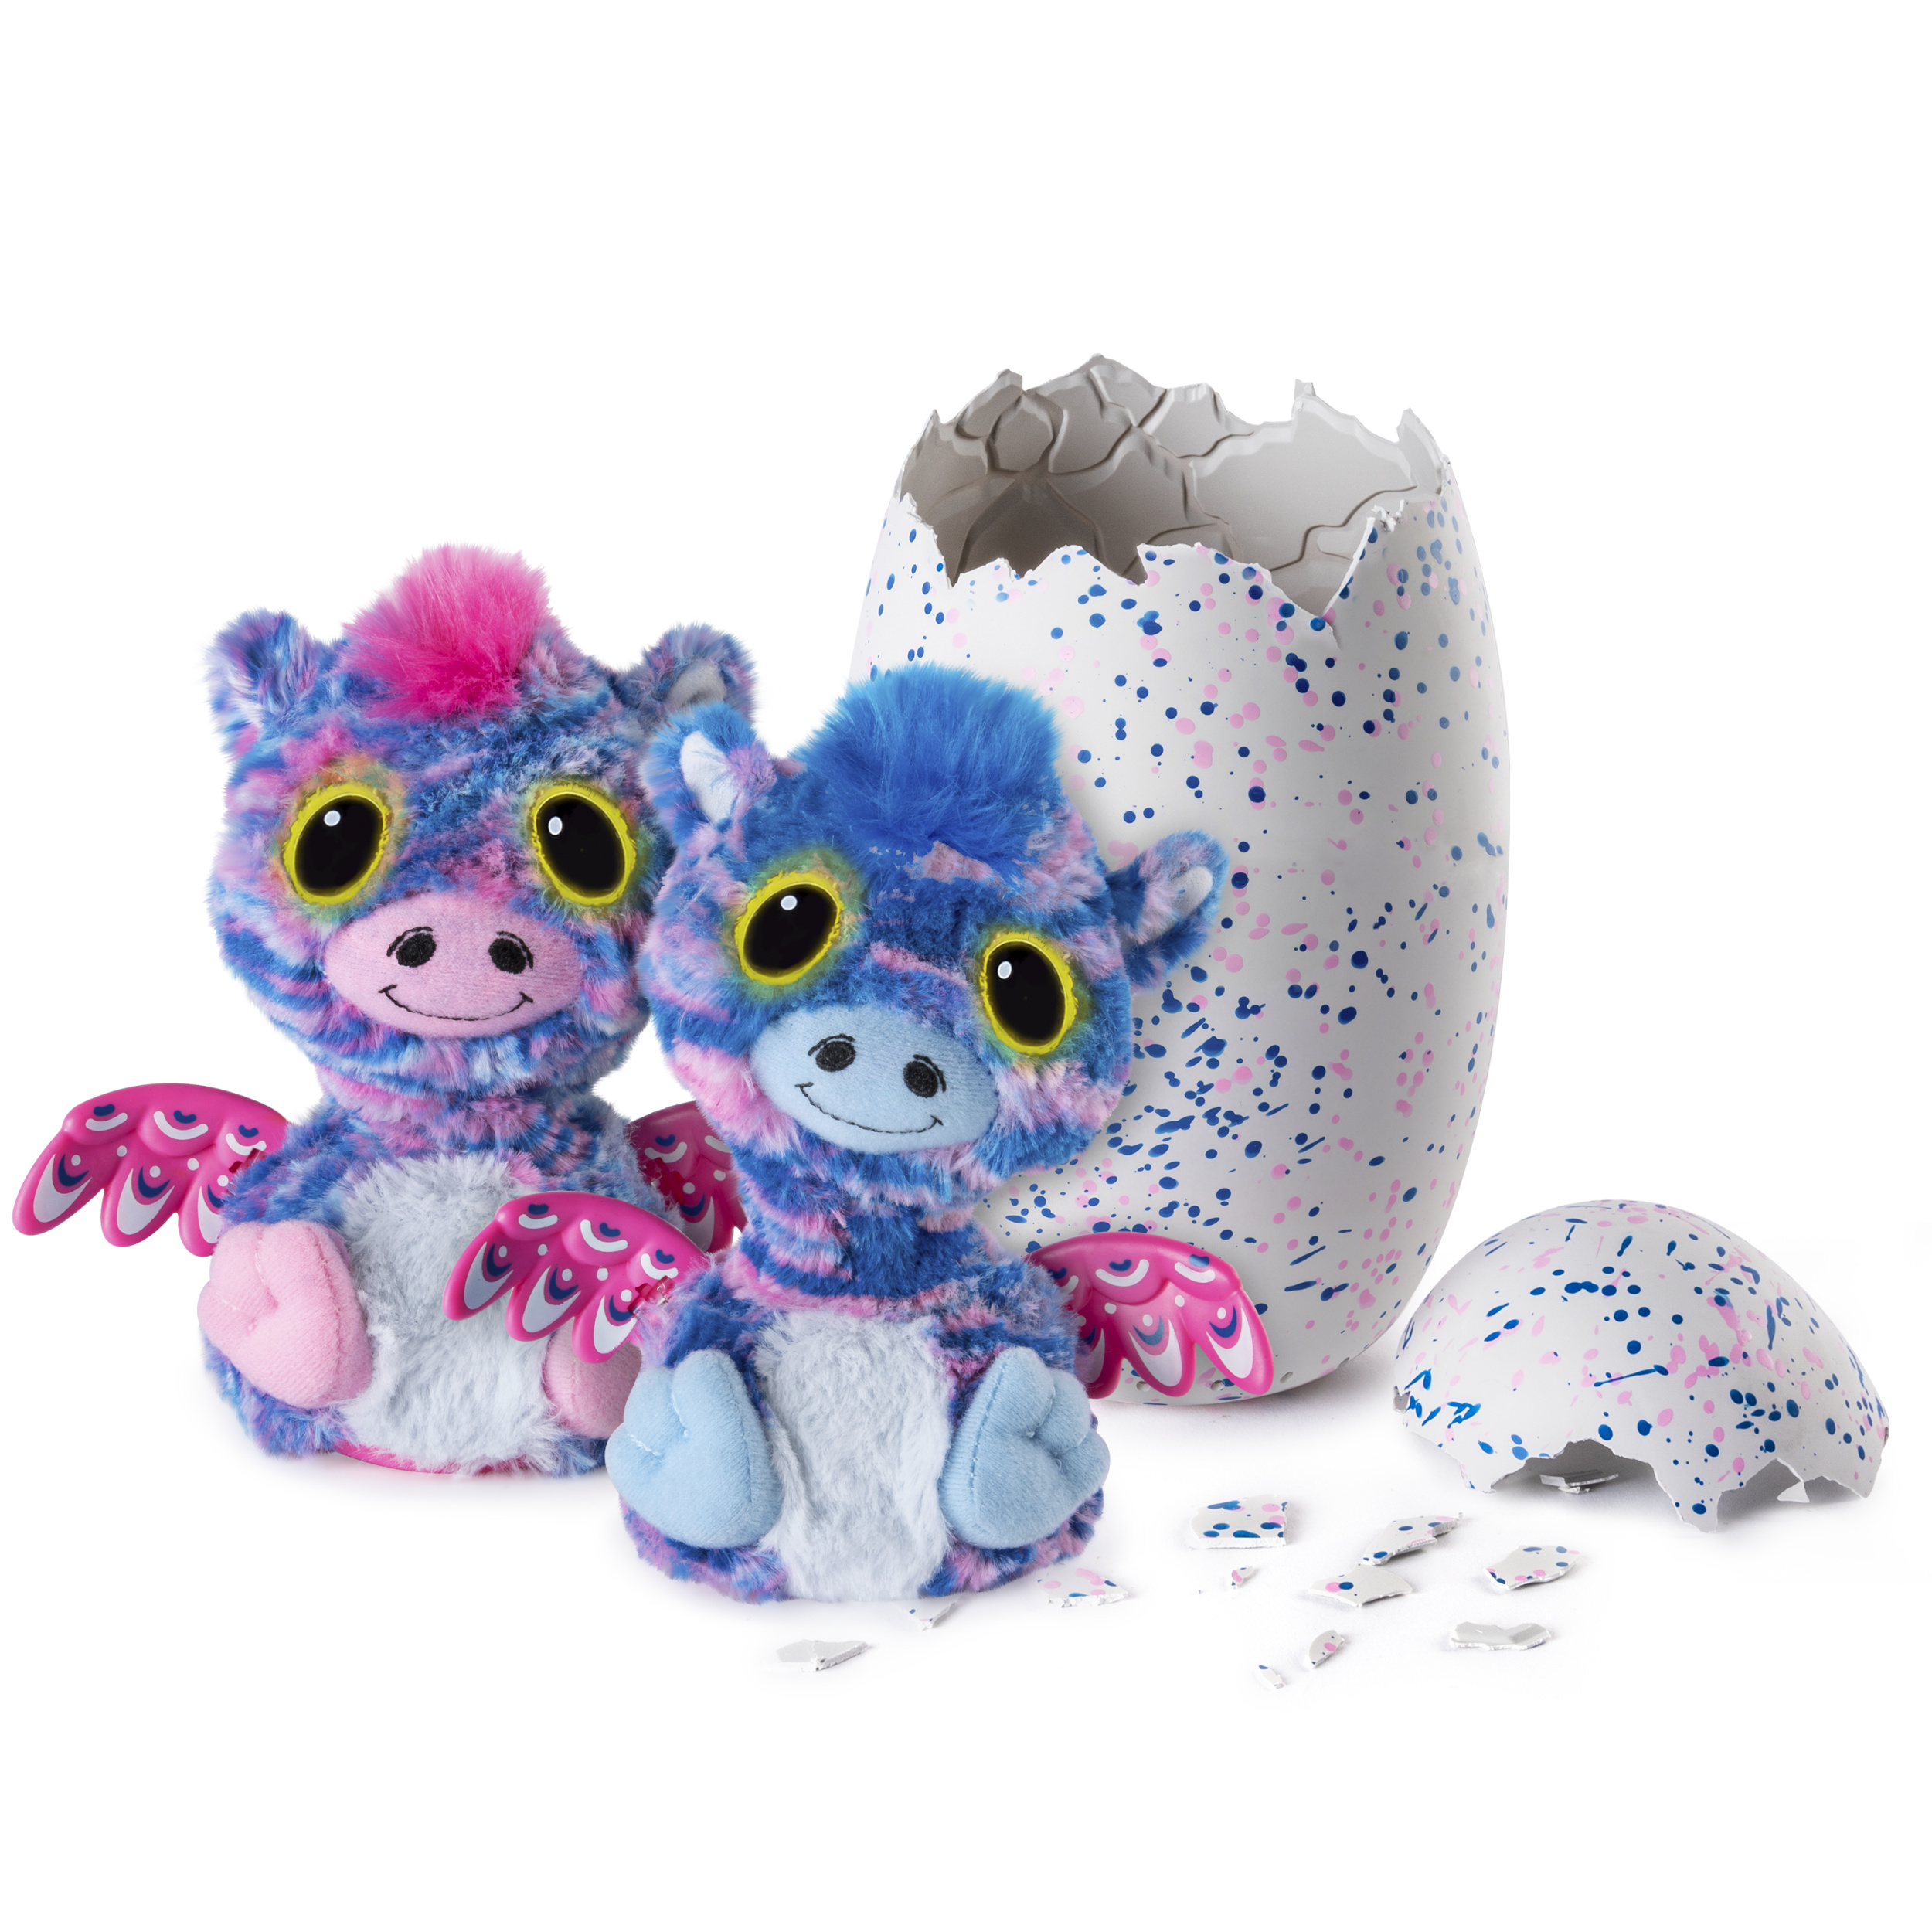 Hatchimals Surprise ? Zuffin ? Hatching Egg with Surprise Twin Interactive Hatchimal Creatures and Bracelet Accessory by Spin Master, Available Exclusively at Walmart - image 4 of 8